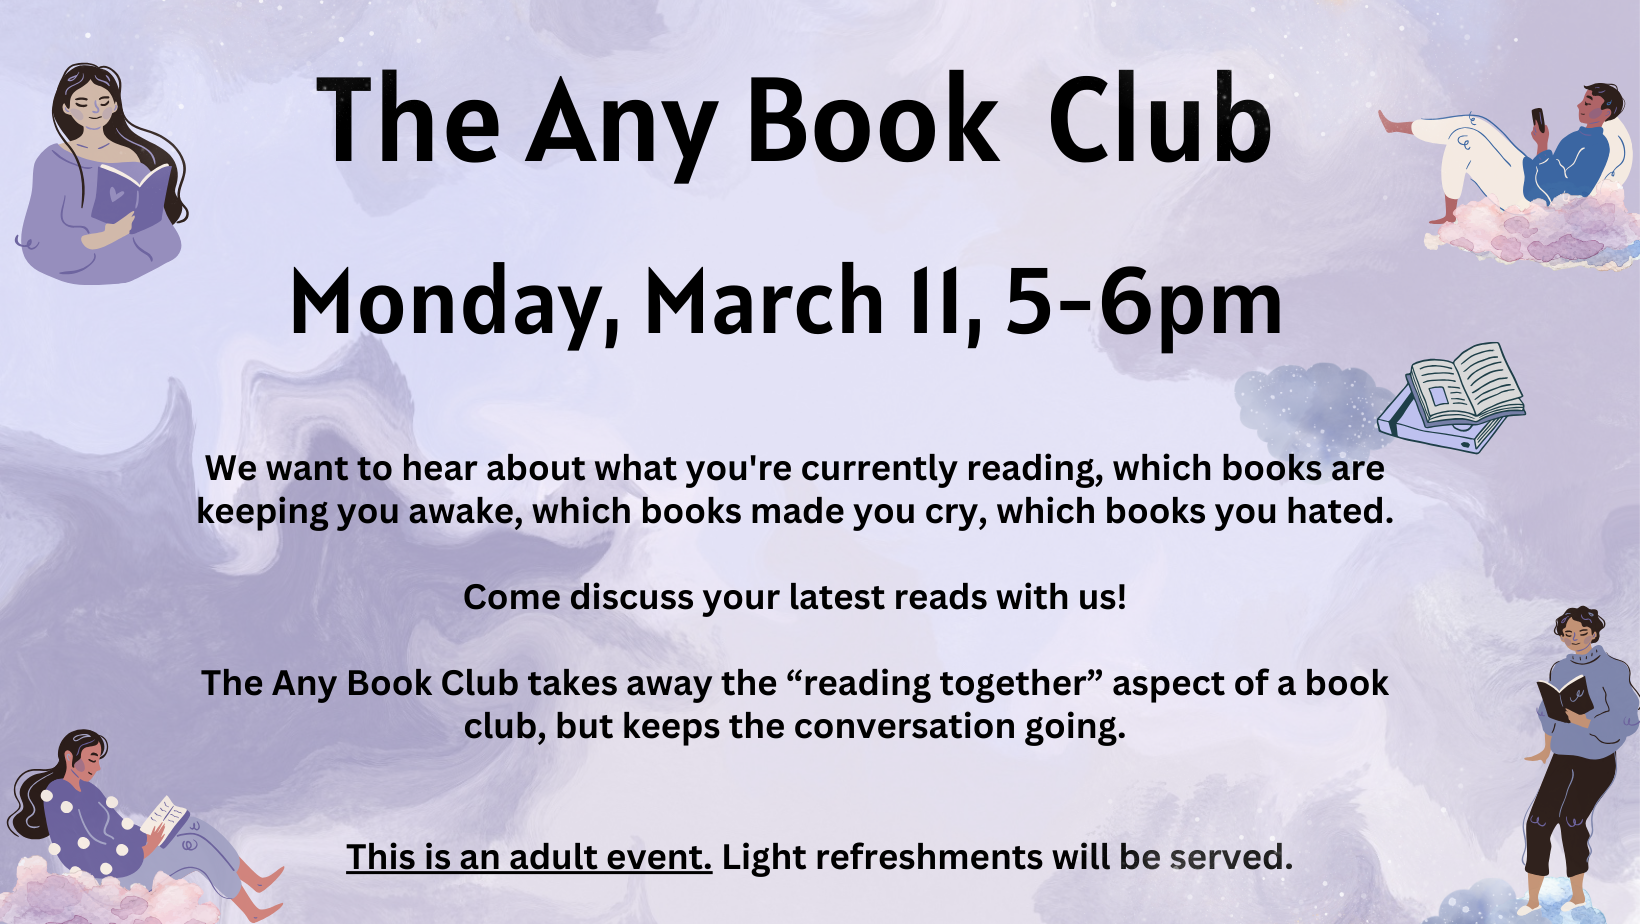 Any Book Club, Monday, March 11 at 5:00 pm